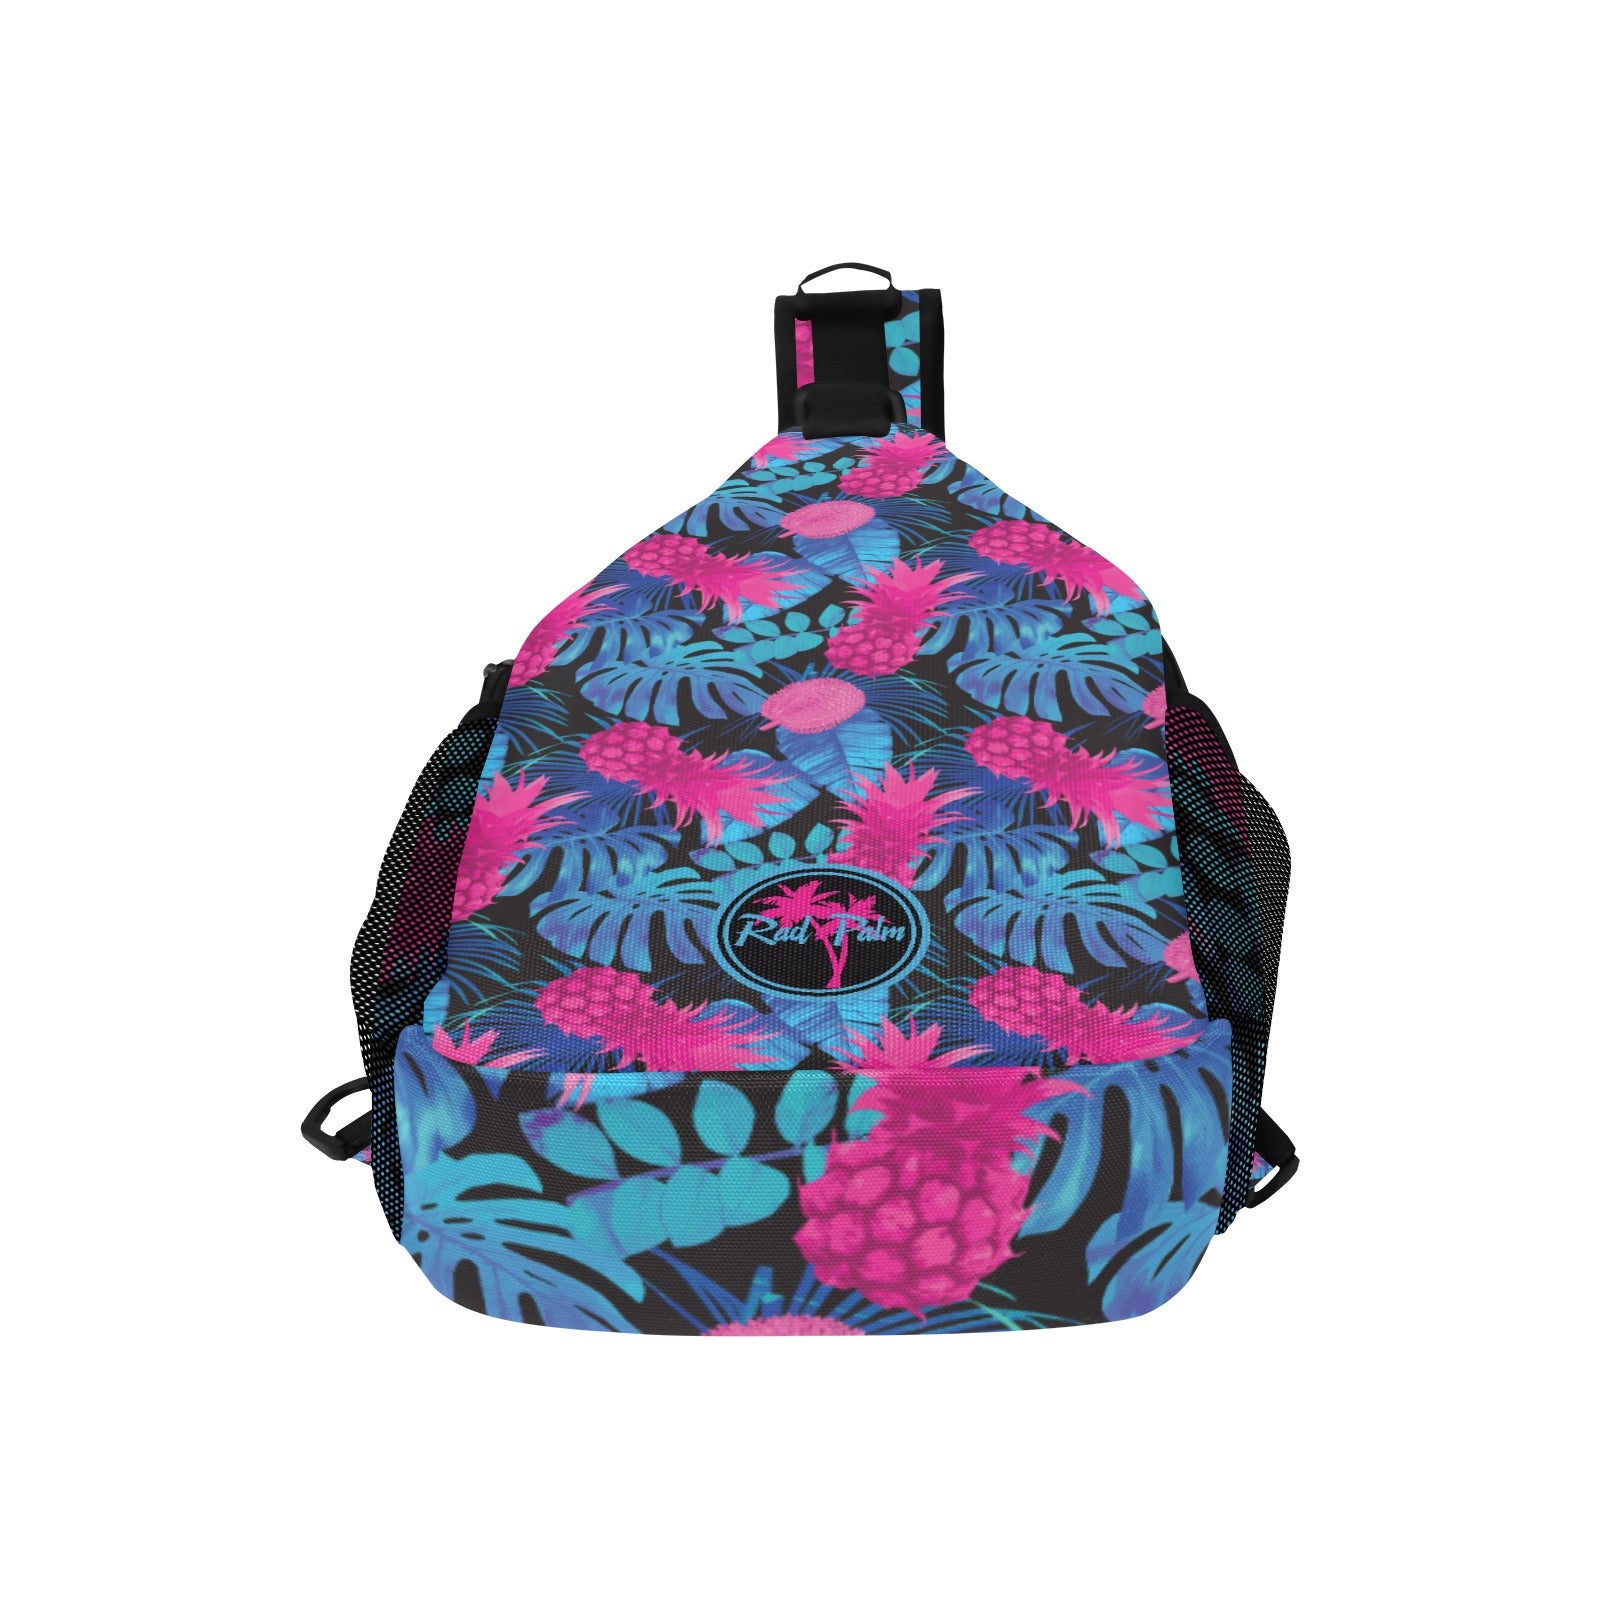 Pineapple Express Chest Bag